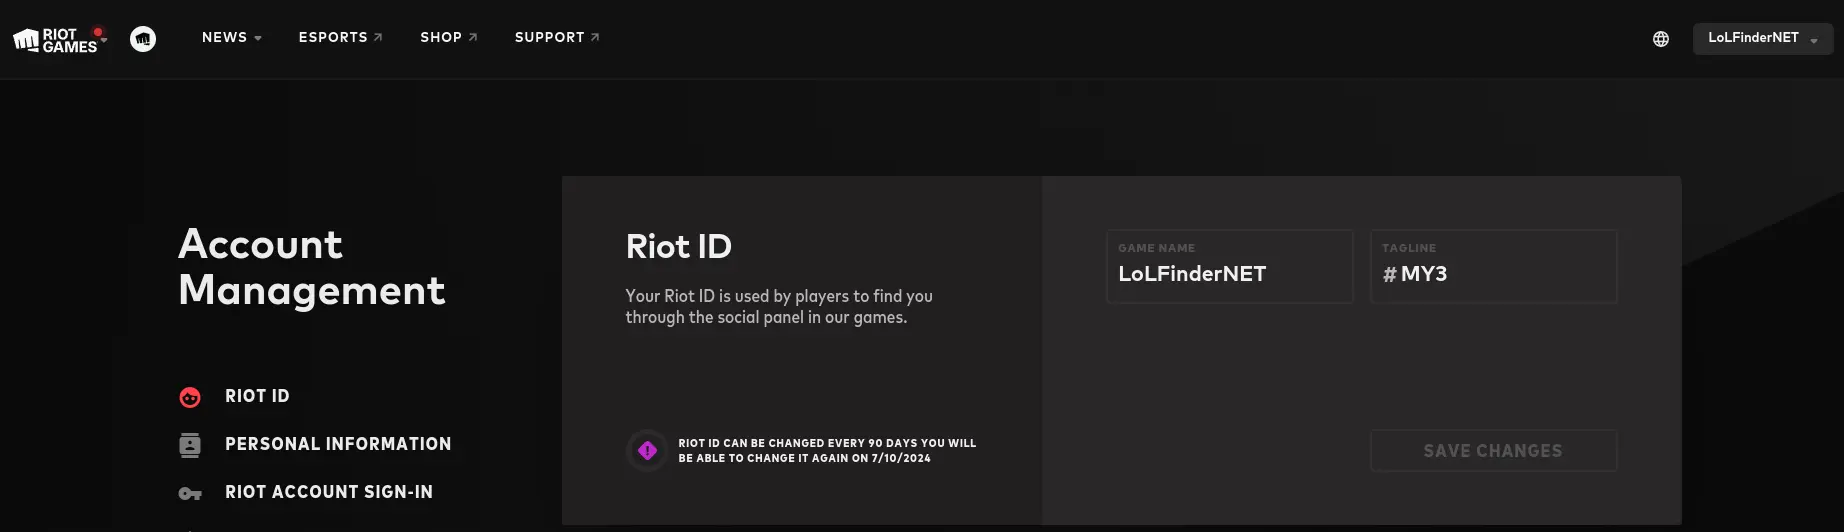 How to find Riot ID